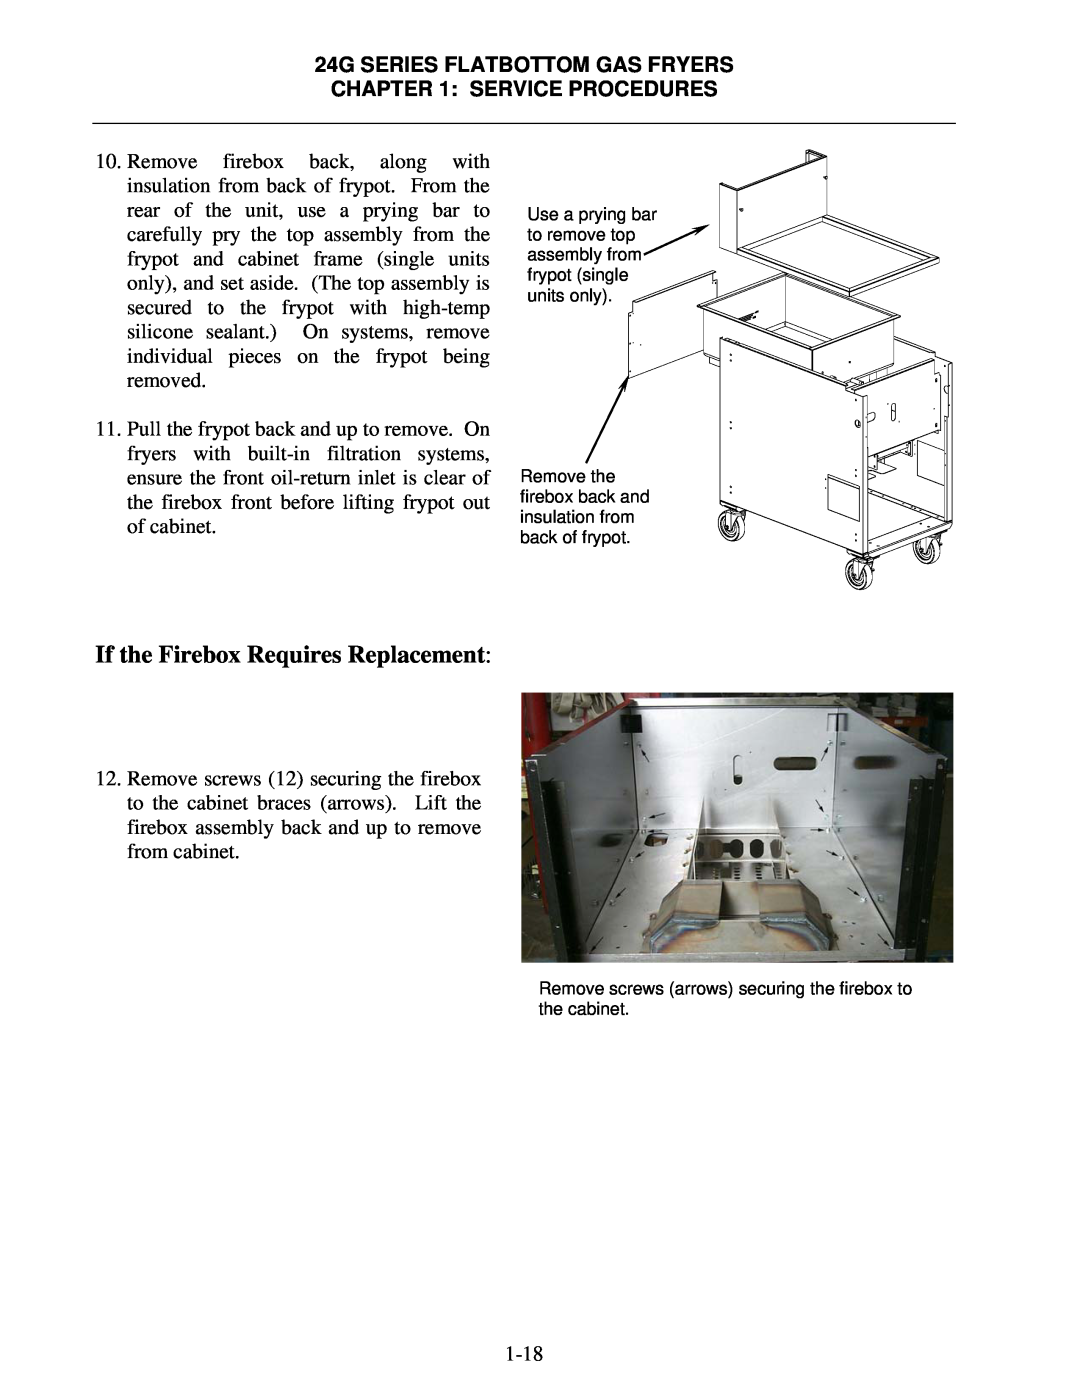 Frymaster 1824/2424G manual If the Firebox Requires Replacement, 24G SERIES FLATBOTTOM GAS FRYERS SERVICE PROCEDURES 